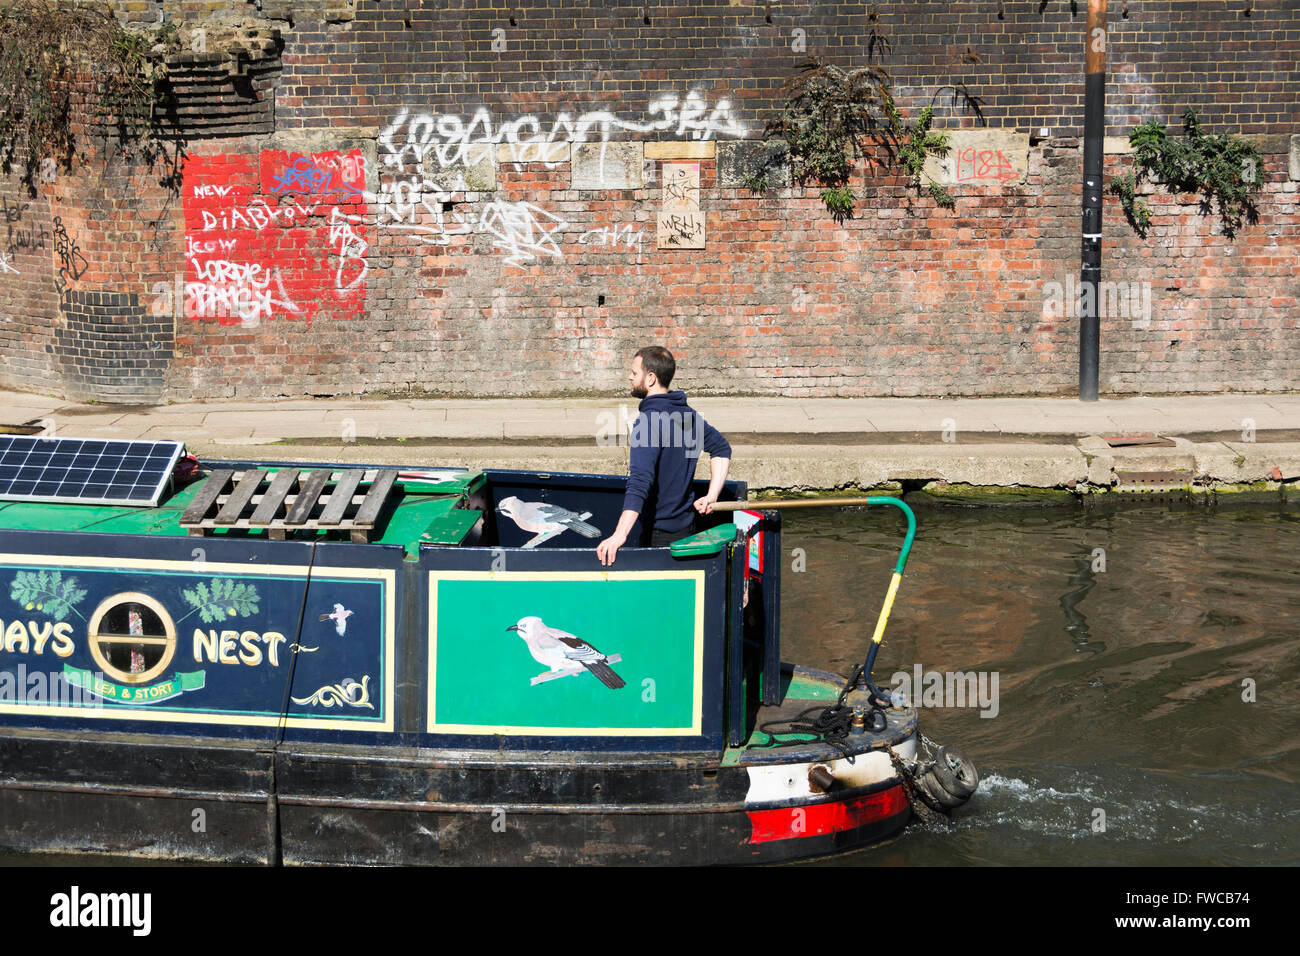 A narrow boat on Regent's Canal in London's King's Cross district, England, UK Stock Photo